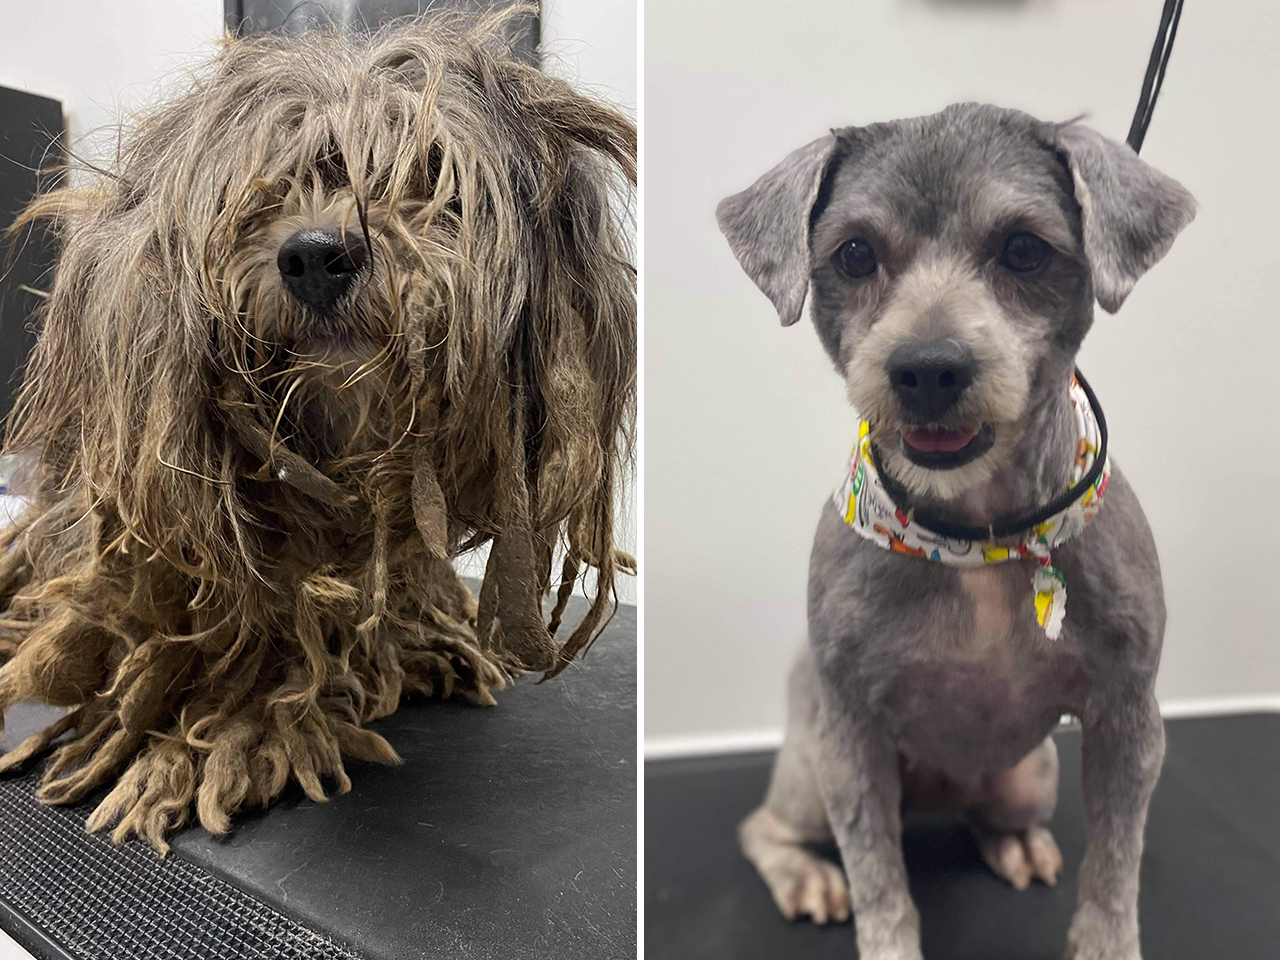 Ottie was found in deplorable condition and even had a chain intertwined into his matted fur. After several grooming sessions the sweetest little dog appeared, but he’s still in search of a family.